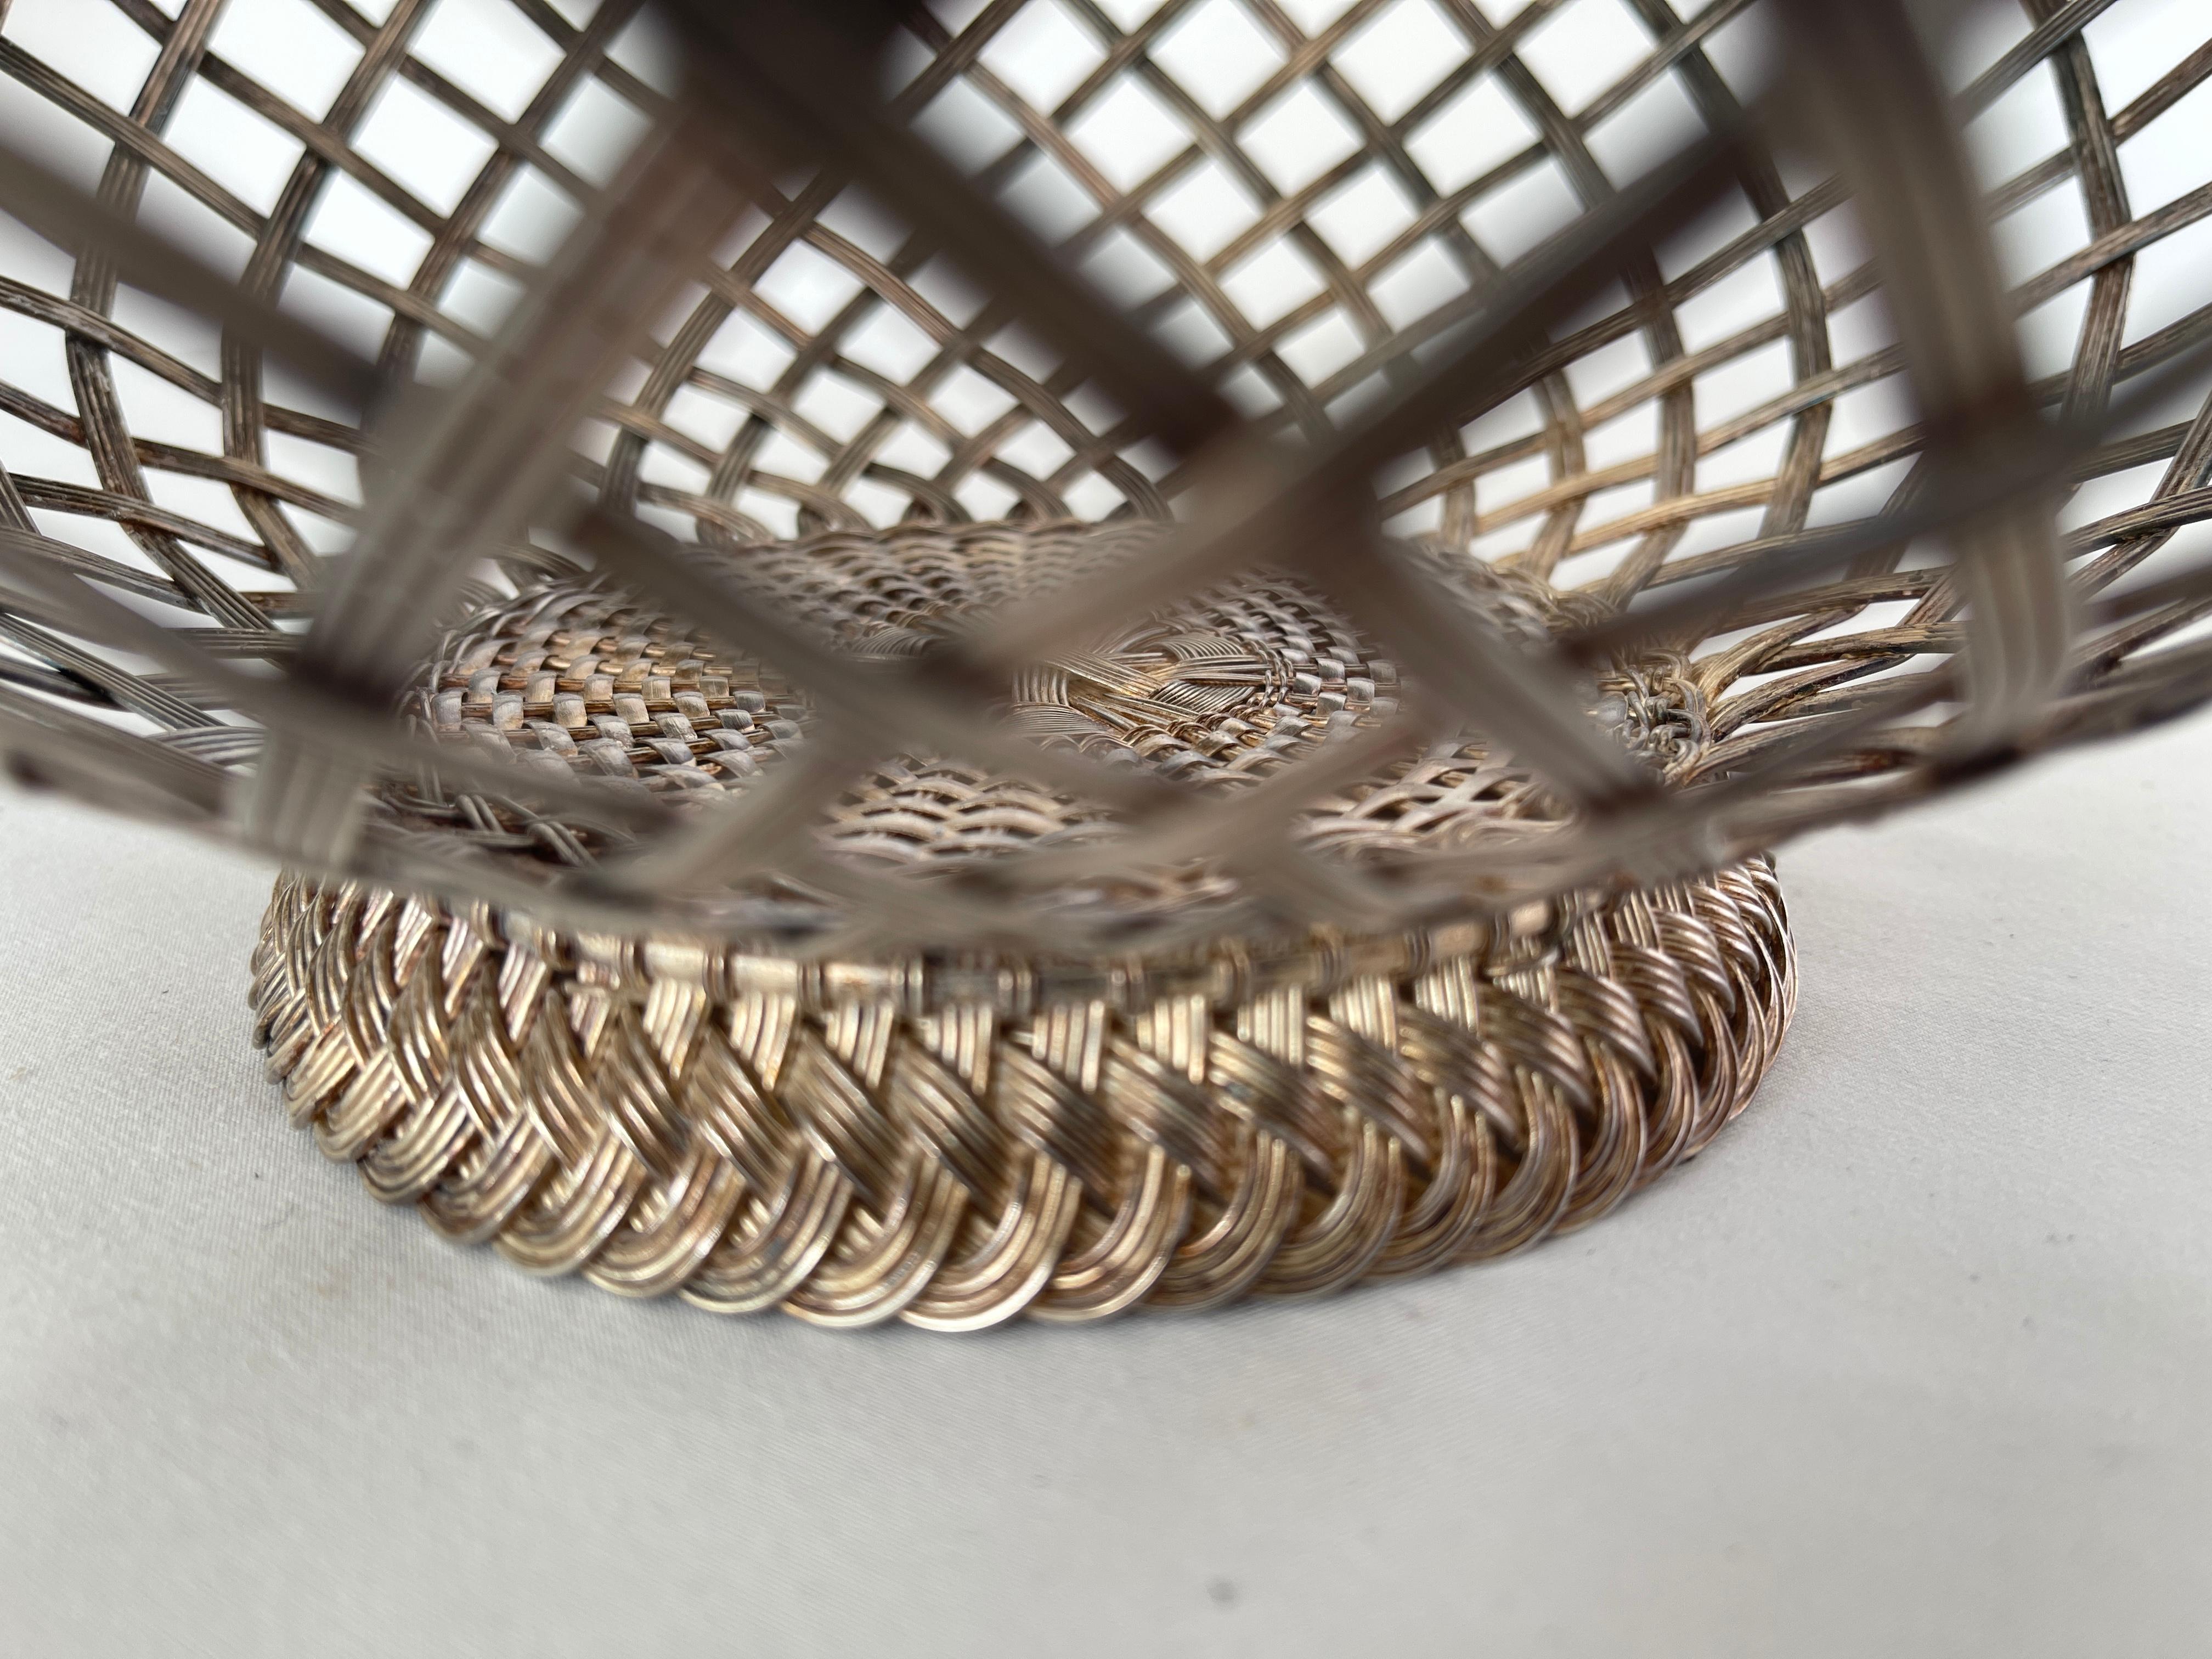 20th Century Christofle Attributed  Silver Plated Woven Metal Serving Basket Made in France